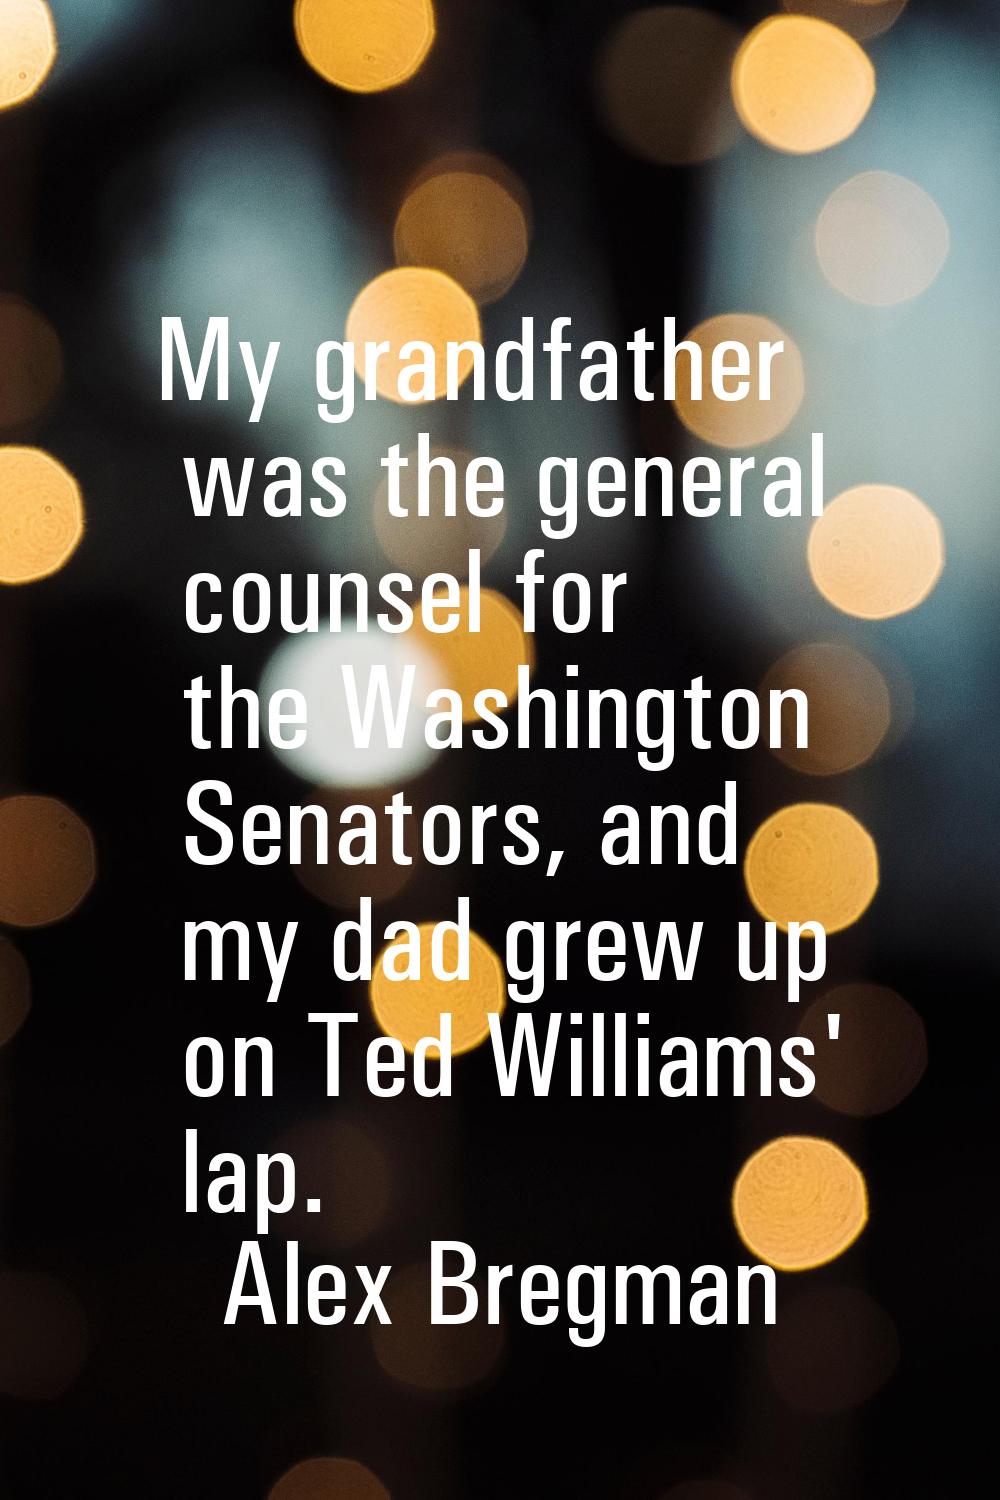 My grandfather was the general counsel for the Washington Senators, and my dad grew up on Ted Willi